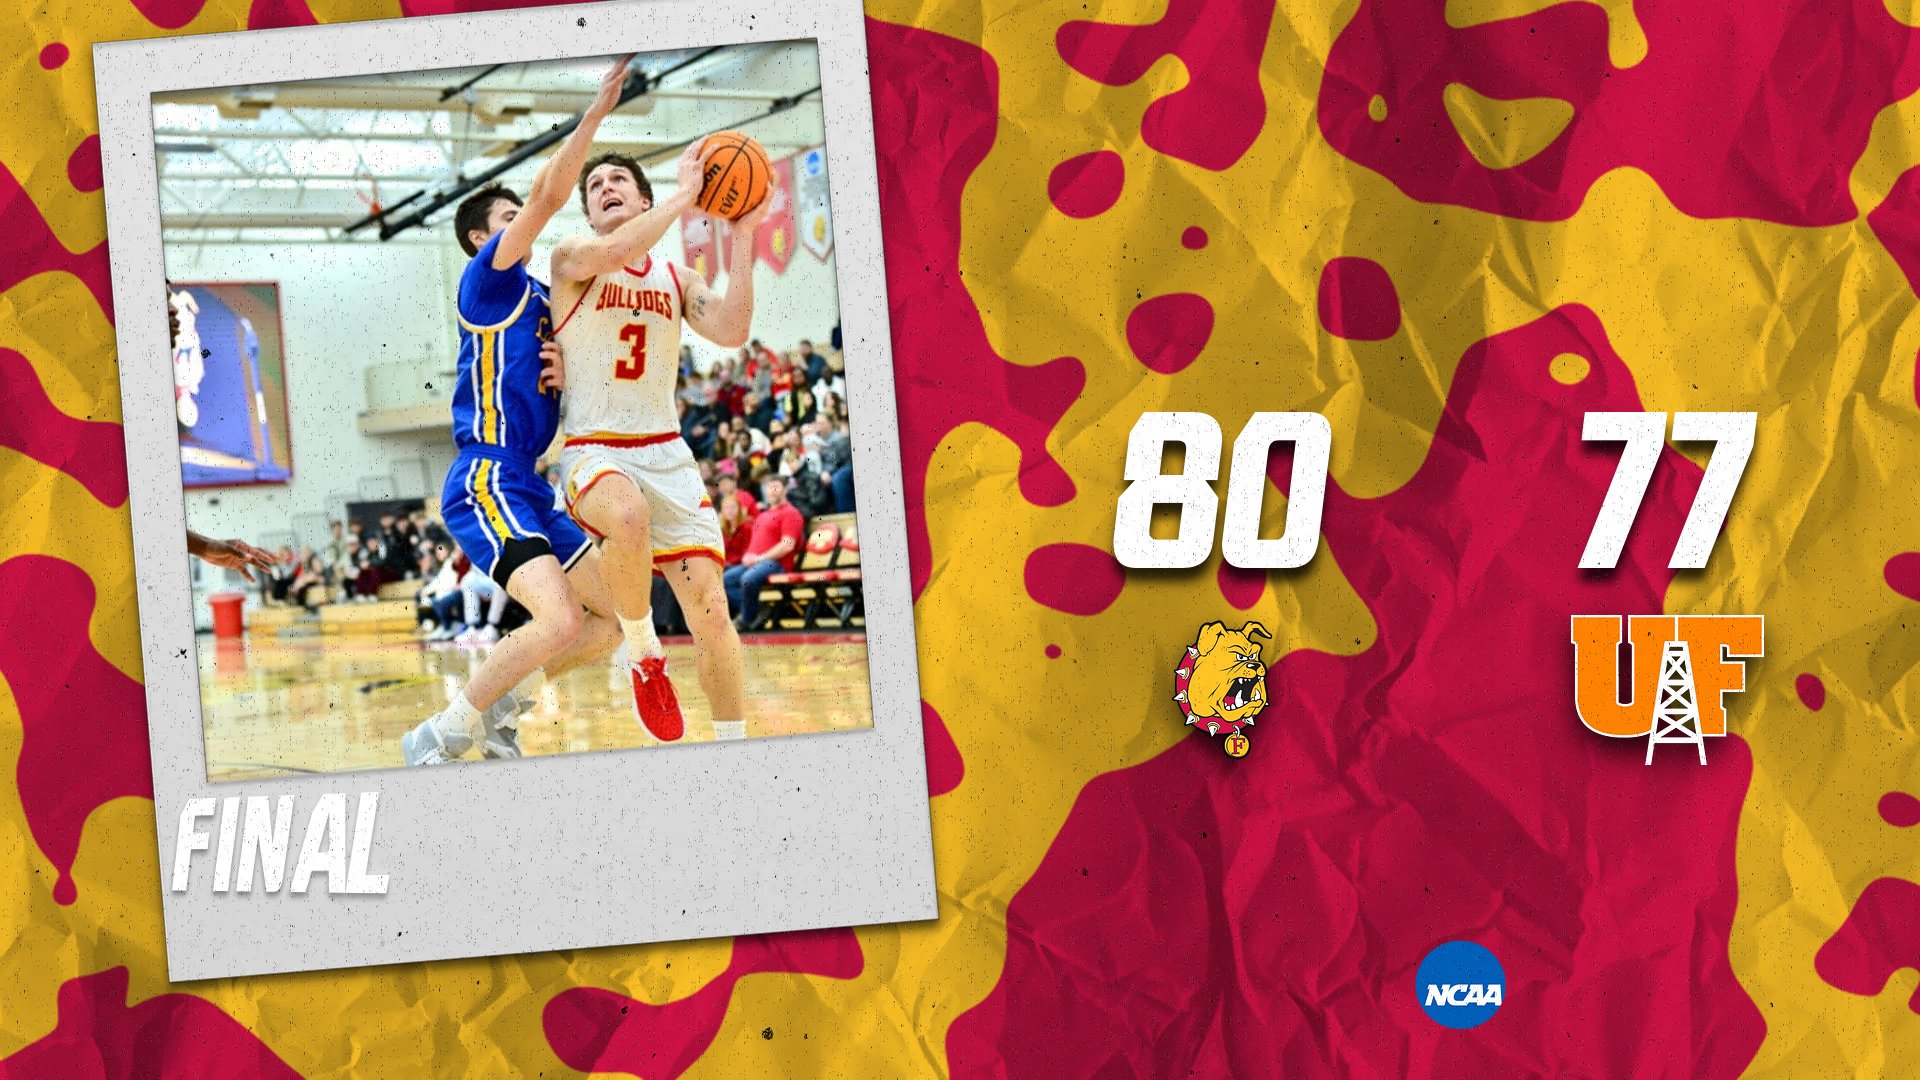 Ferris State Pulls Out Close Road Win At Findlay To Remain Unbeaten This Year